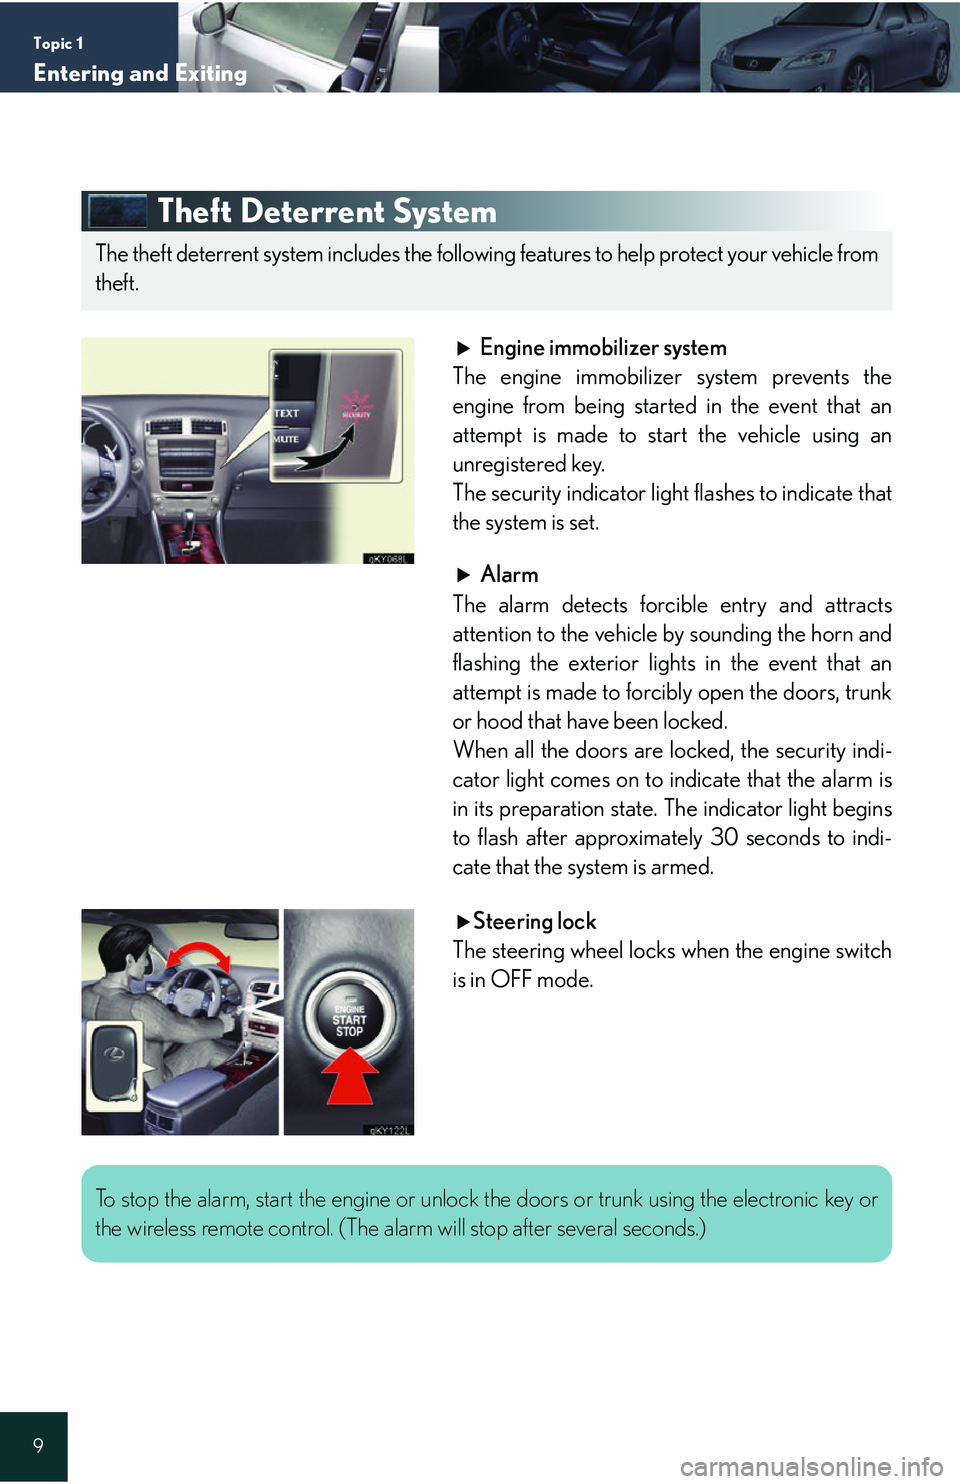 Lexus IS250 2006  Using the interior lights / LEXUS 2006 IS350/250 QUICK REFERENCE GUIDE Topic 1
Entering and Exiting
9
Theft Deterrent System
Engine immobilizer system
The engine immobilizer system prevents the
engine from being started in the event that an
attempt is made to start the v